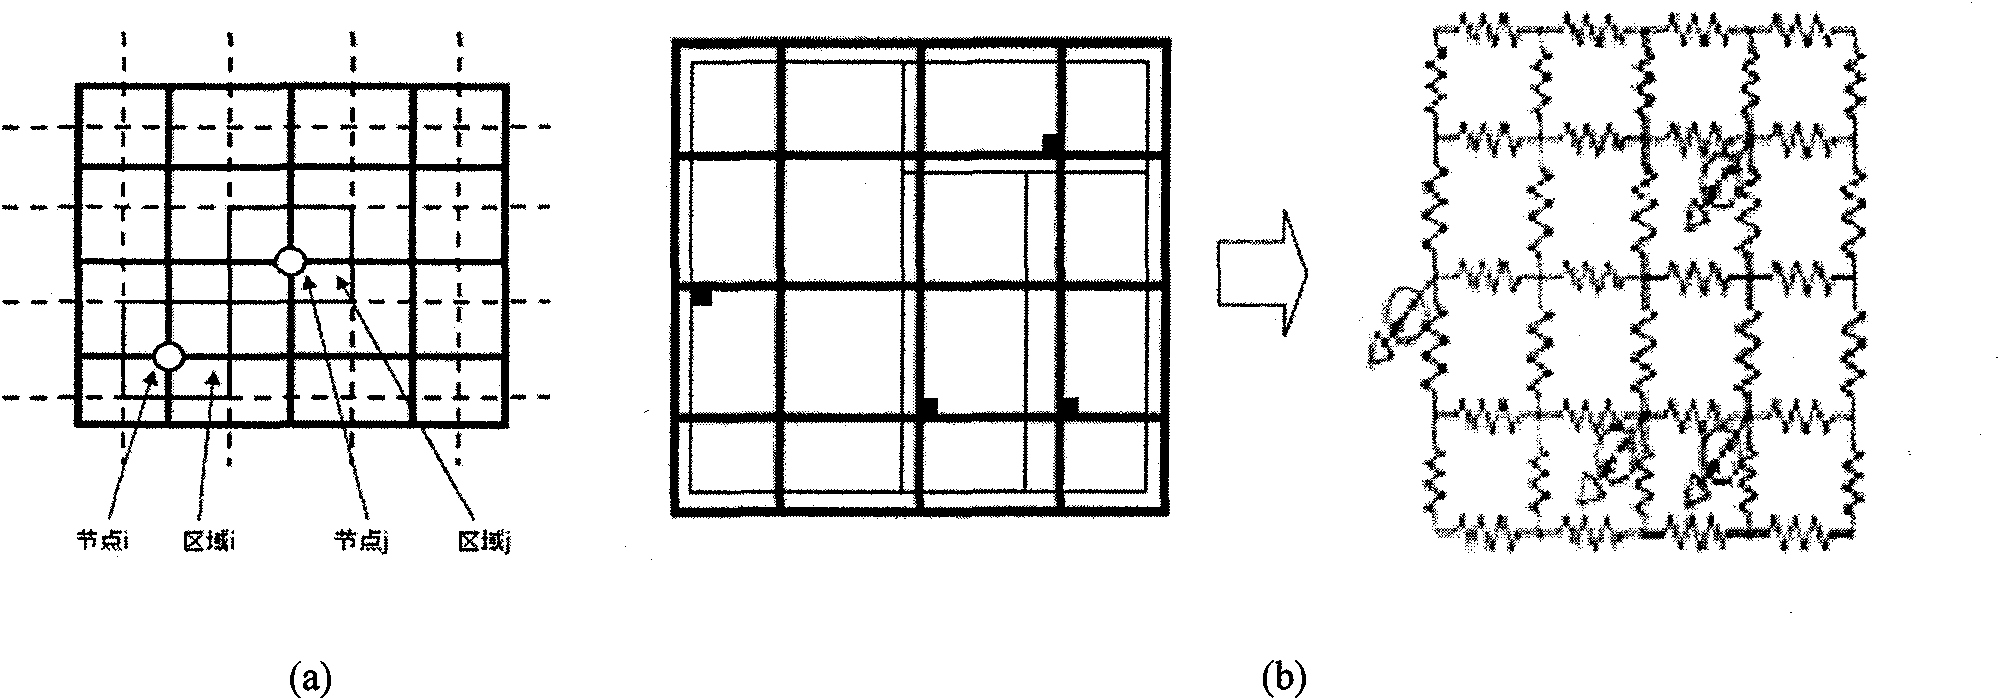 Collaborative design method for power/ground network and layout planning based on pattern matching